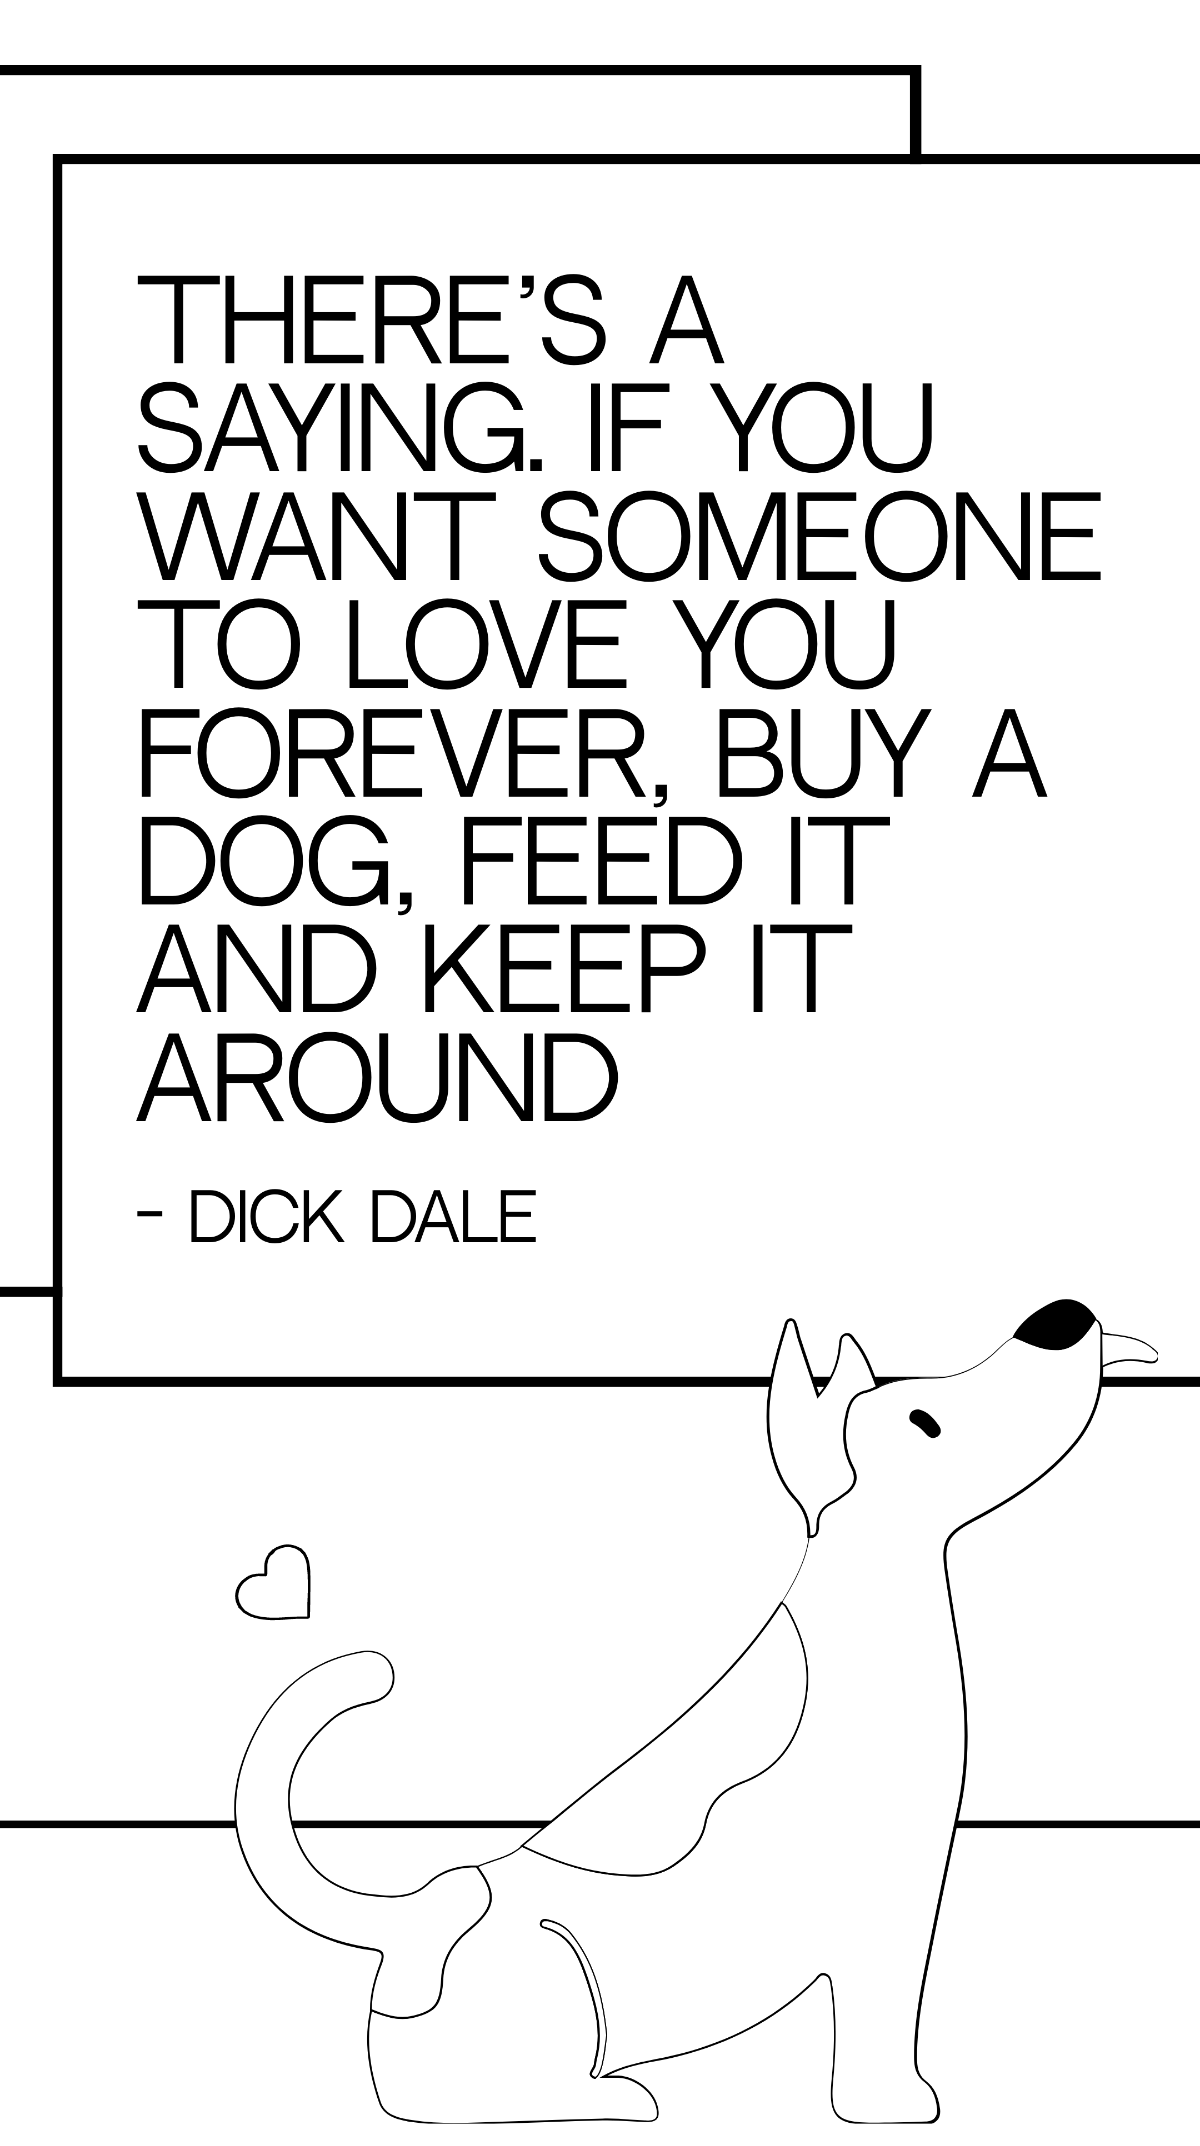 Free Dick Dale - There's a saying. If you want someone to love you forever, buy a dog, feed it and keep it around Template